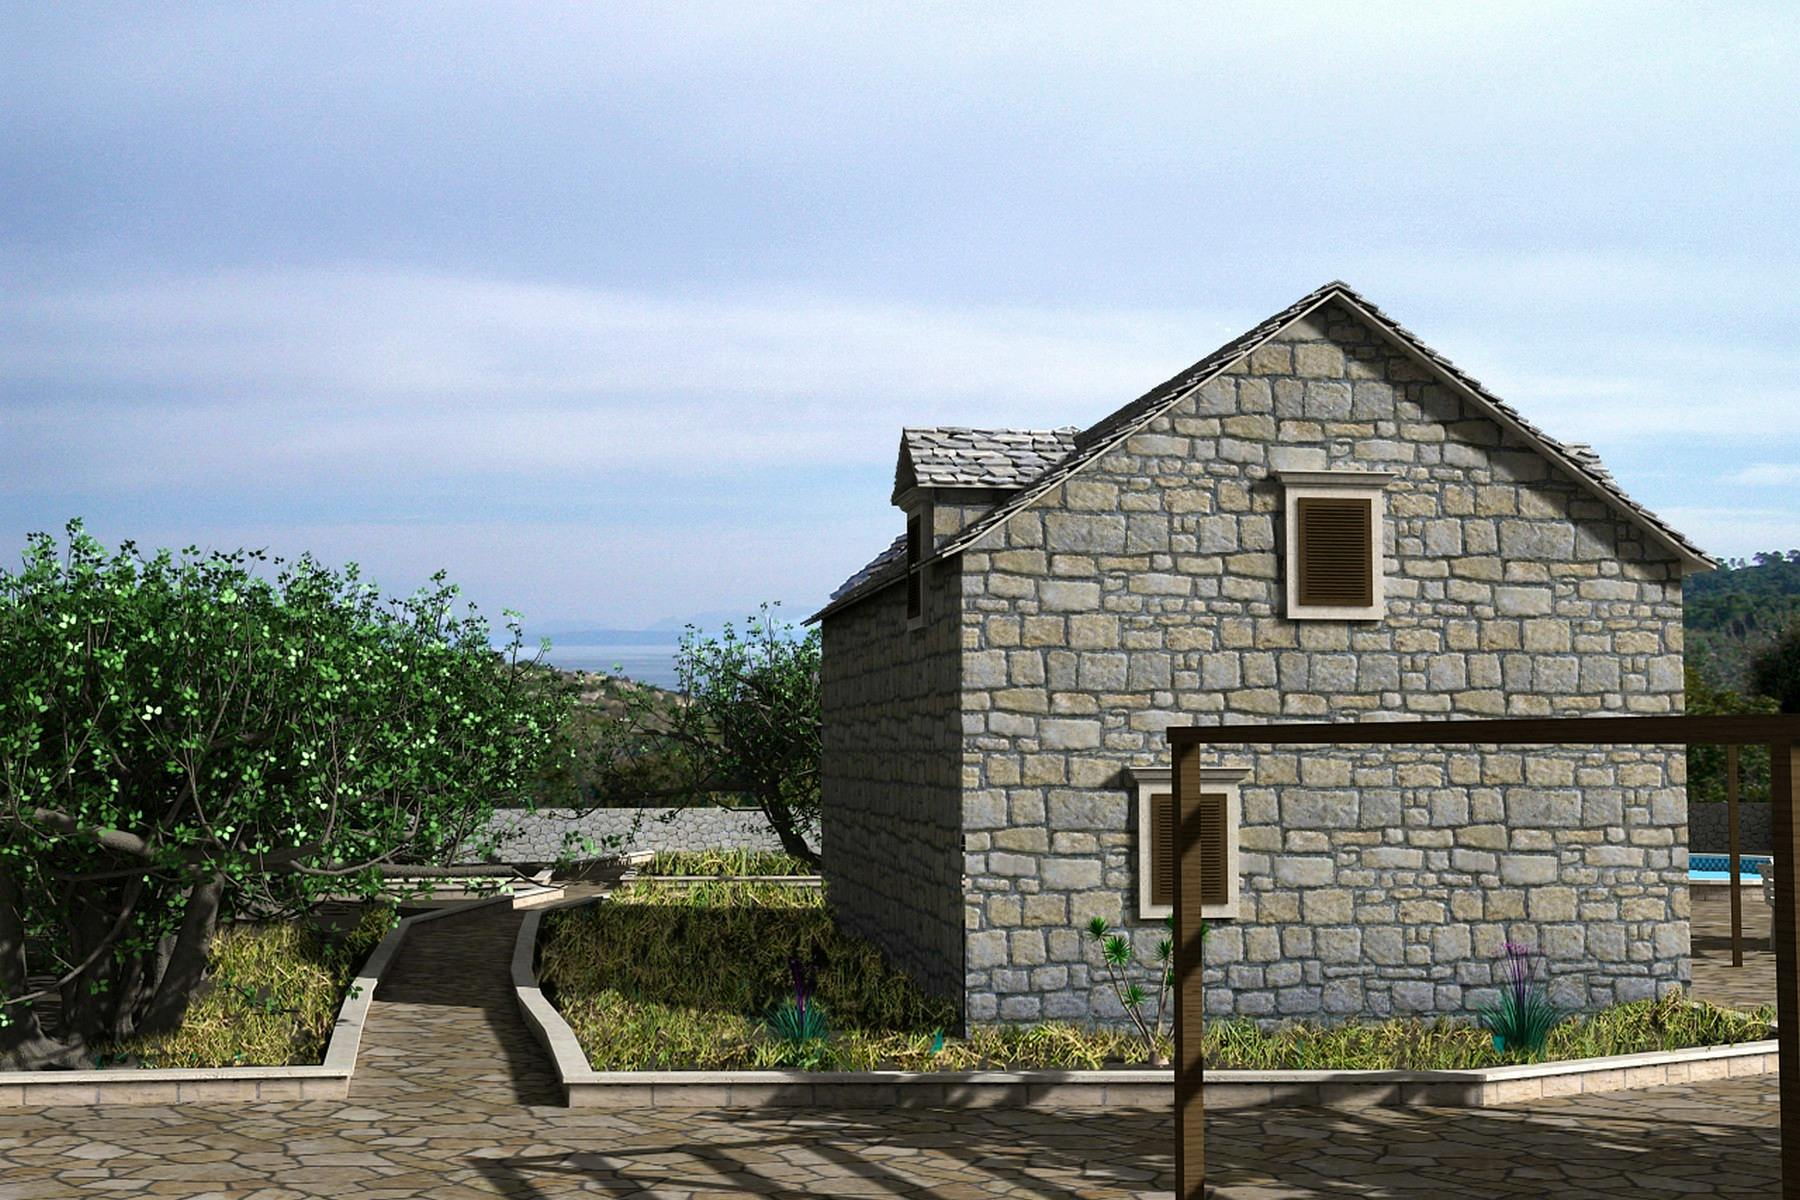 Rustic stone house on the island